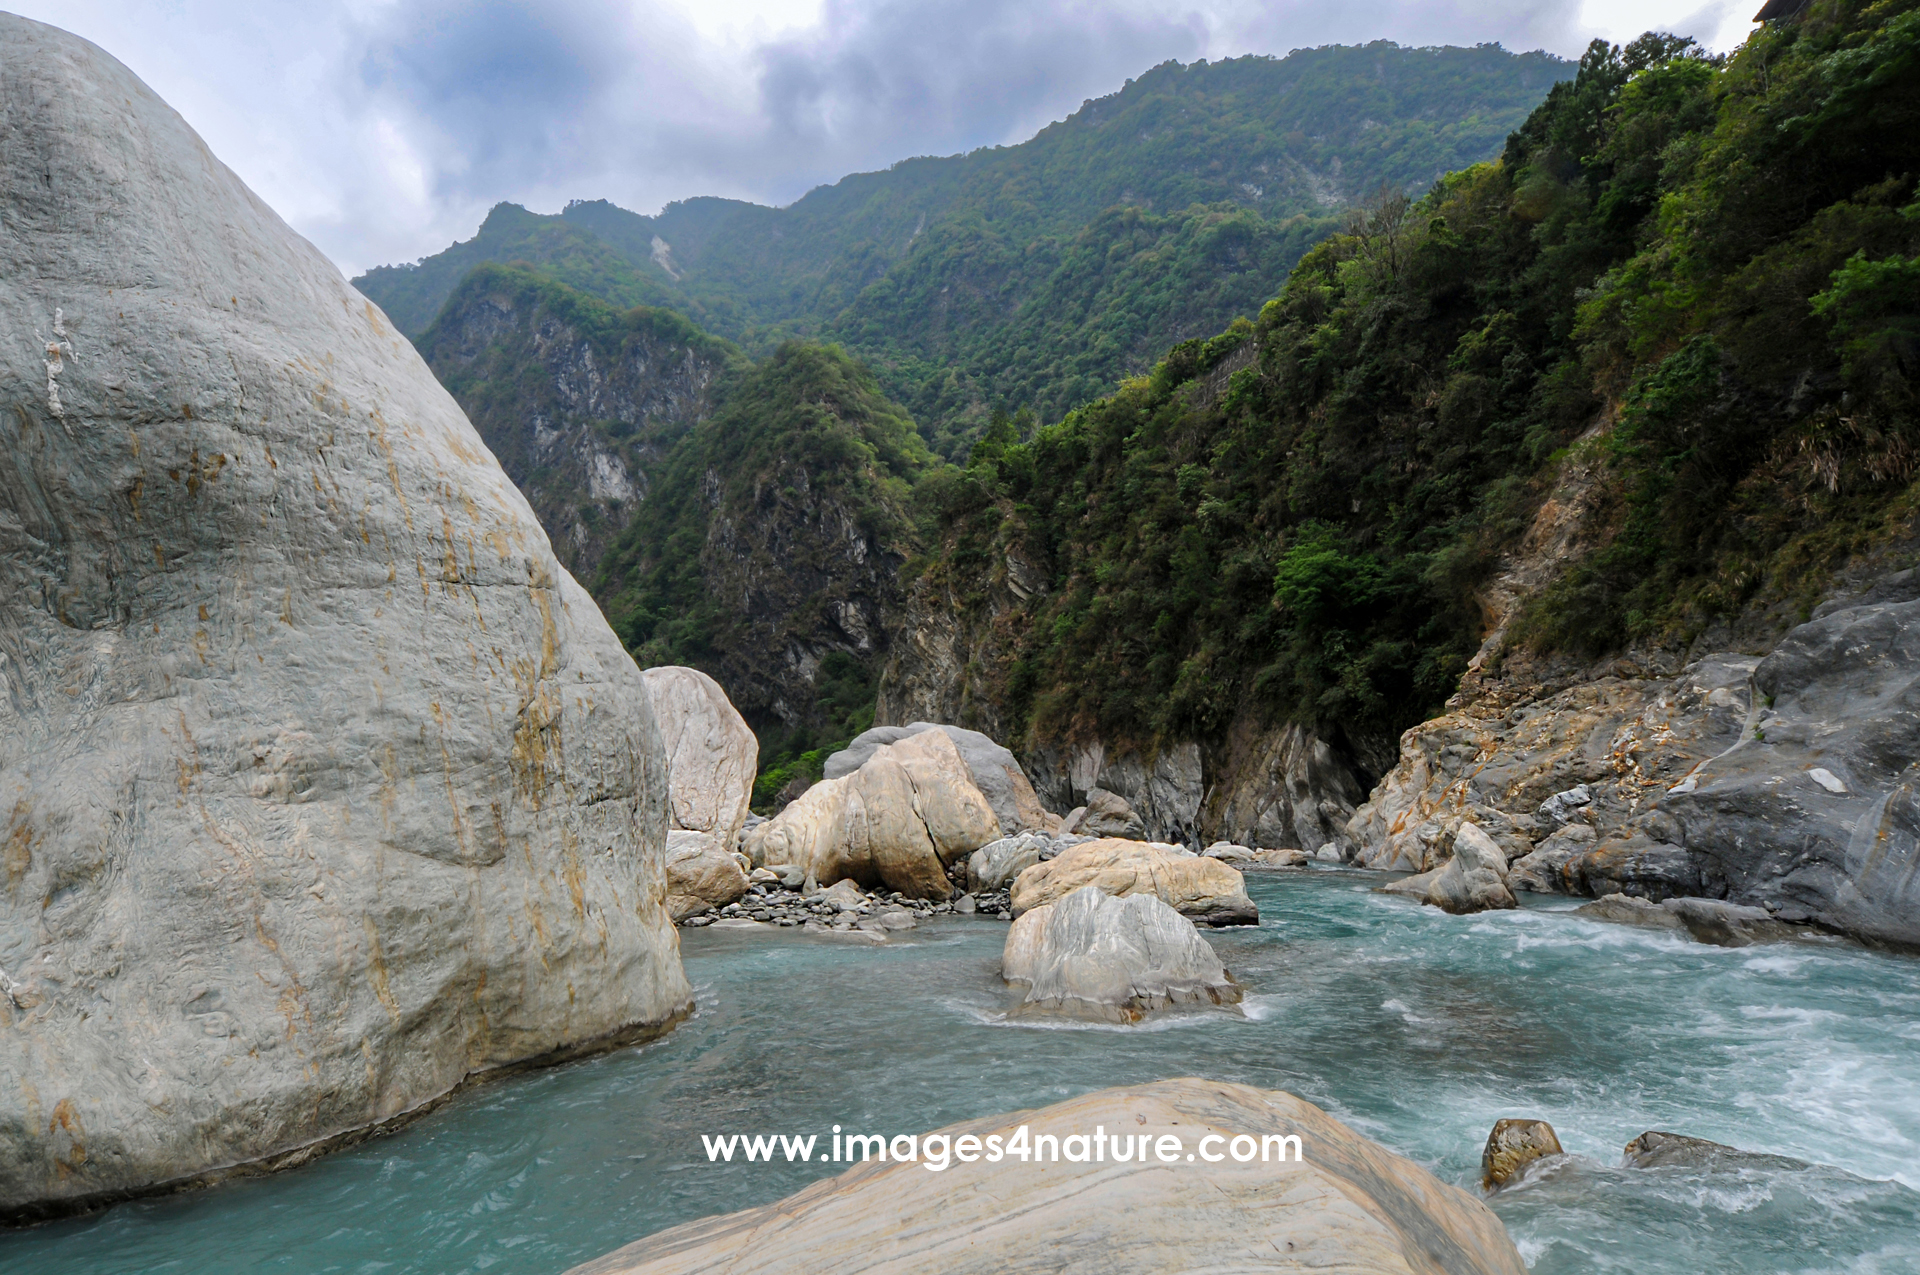 Scenic view of Taiwan's Taroko Gorge with stream and boulders